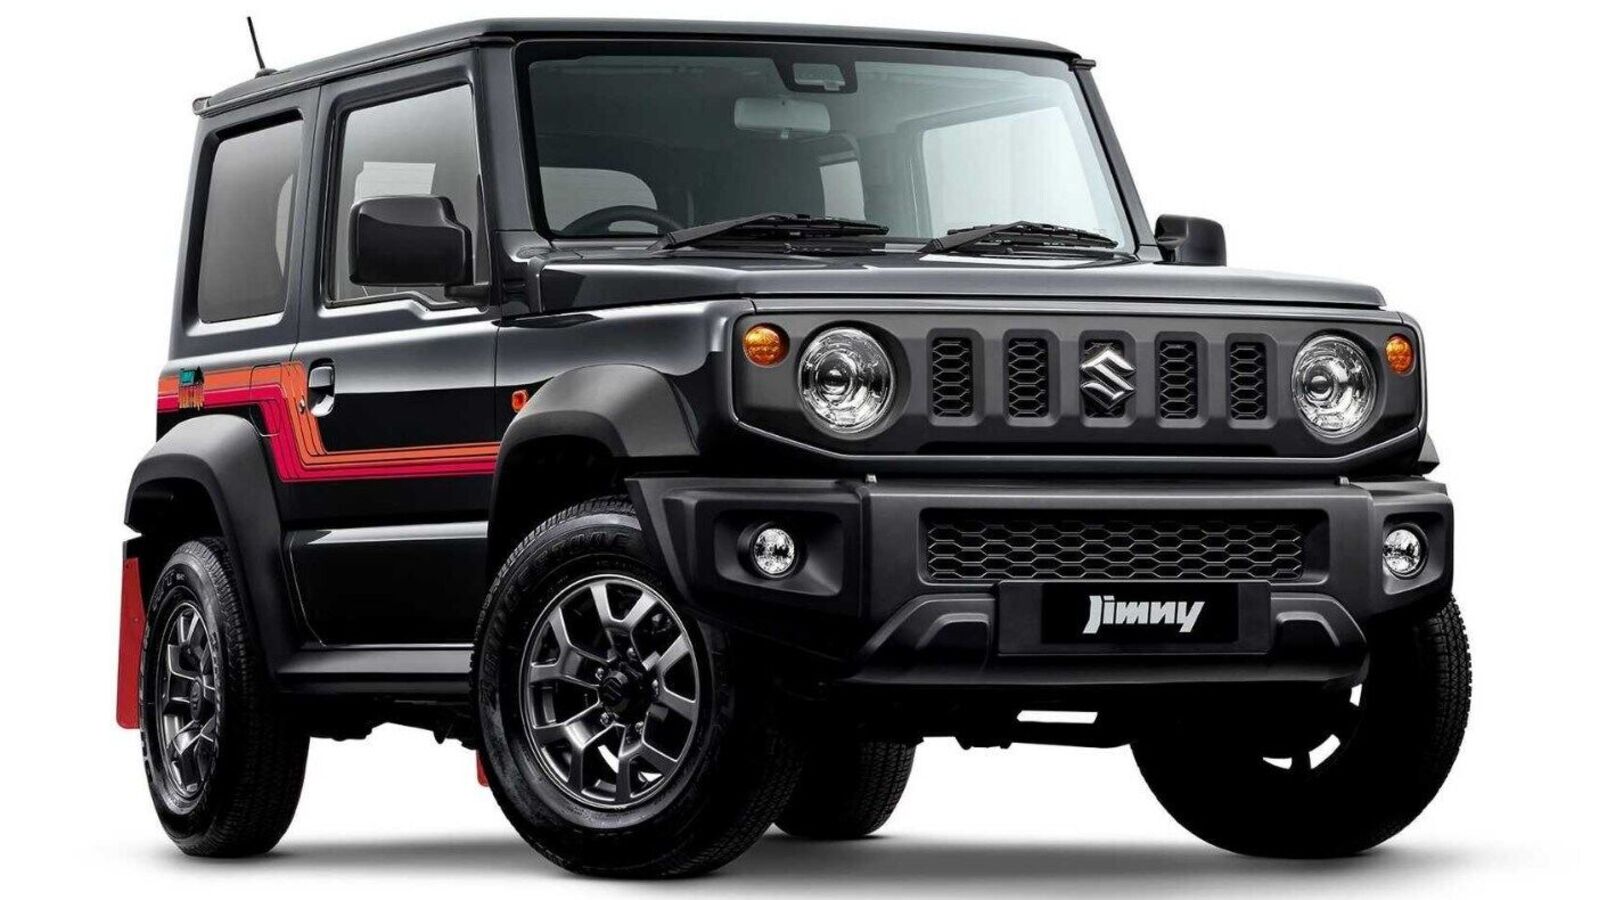 Check out Suzuki Jimny Special Heritage Edition. Only 300 up for